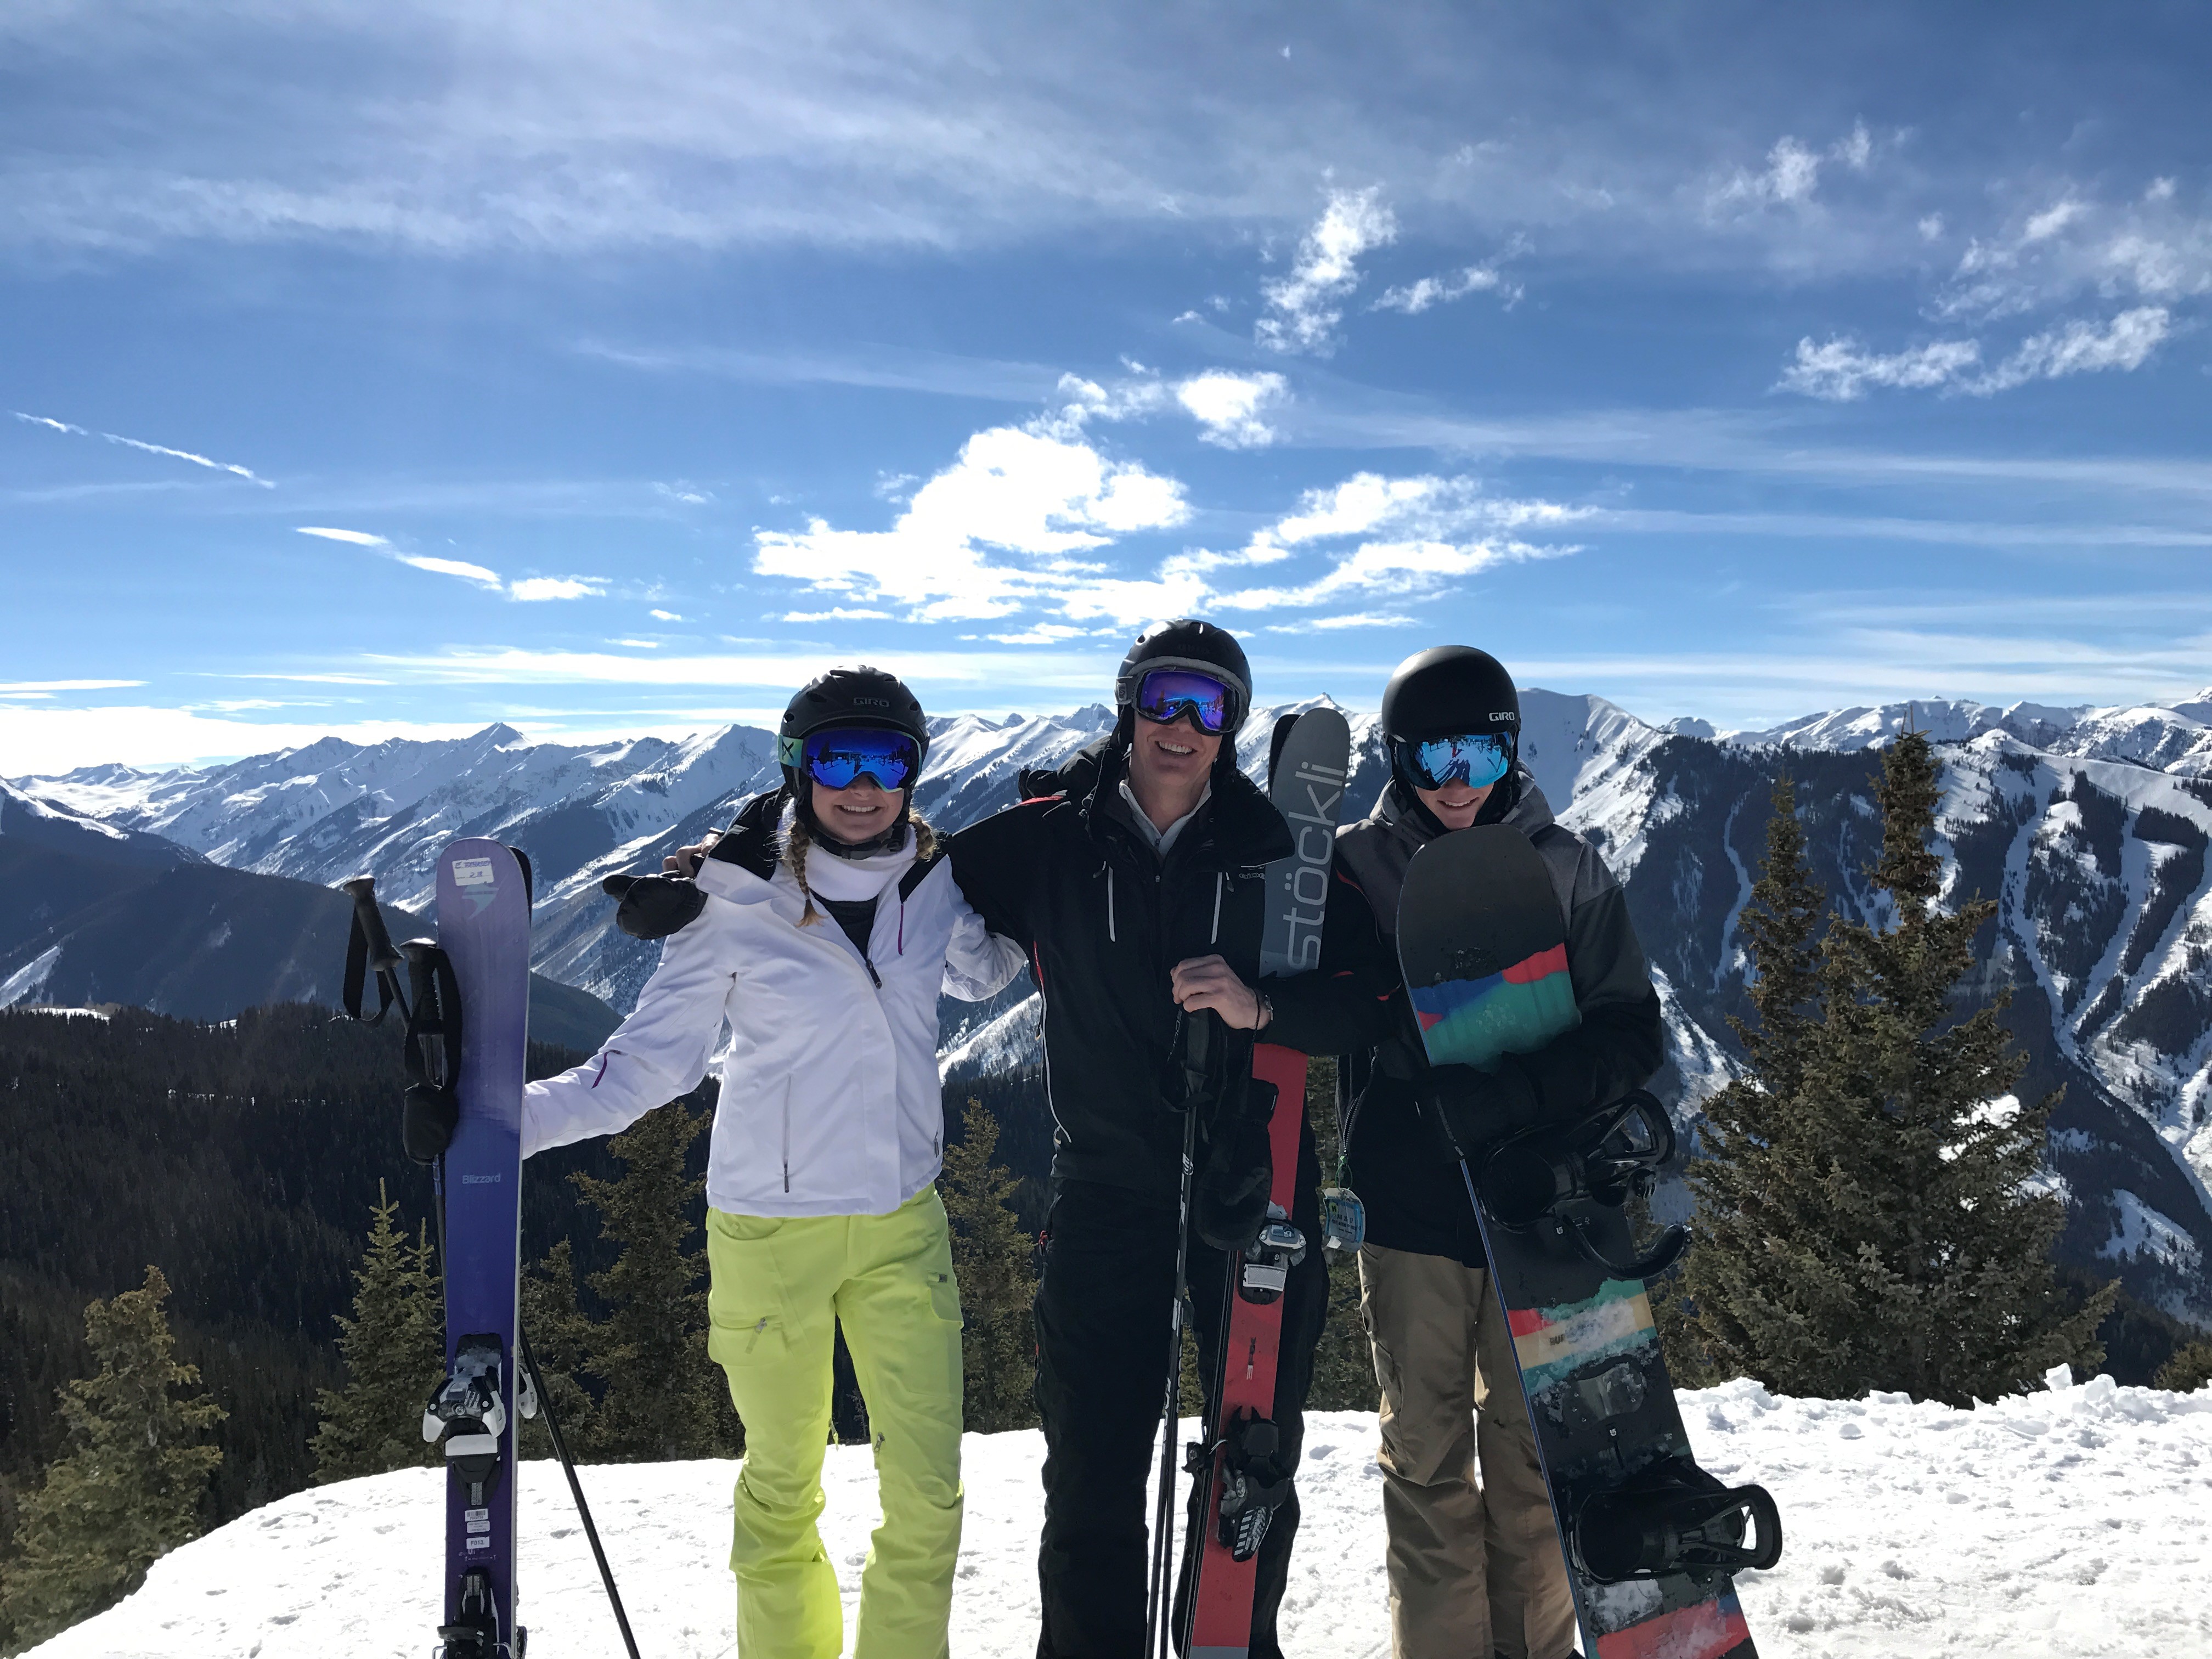 Geoff Winkley, MD family skiing trip in the mountains